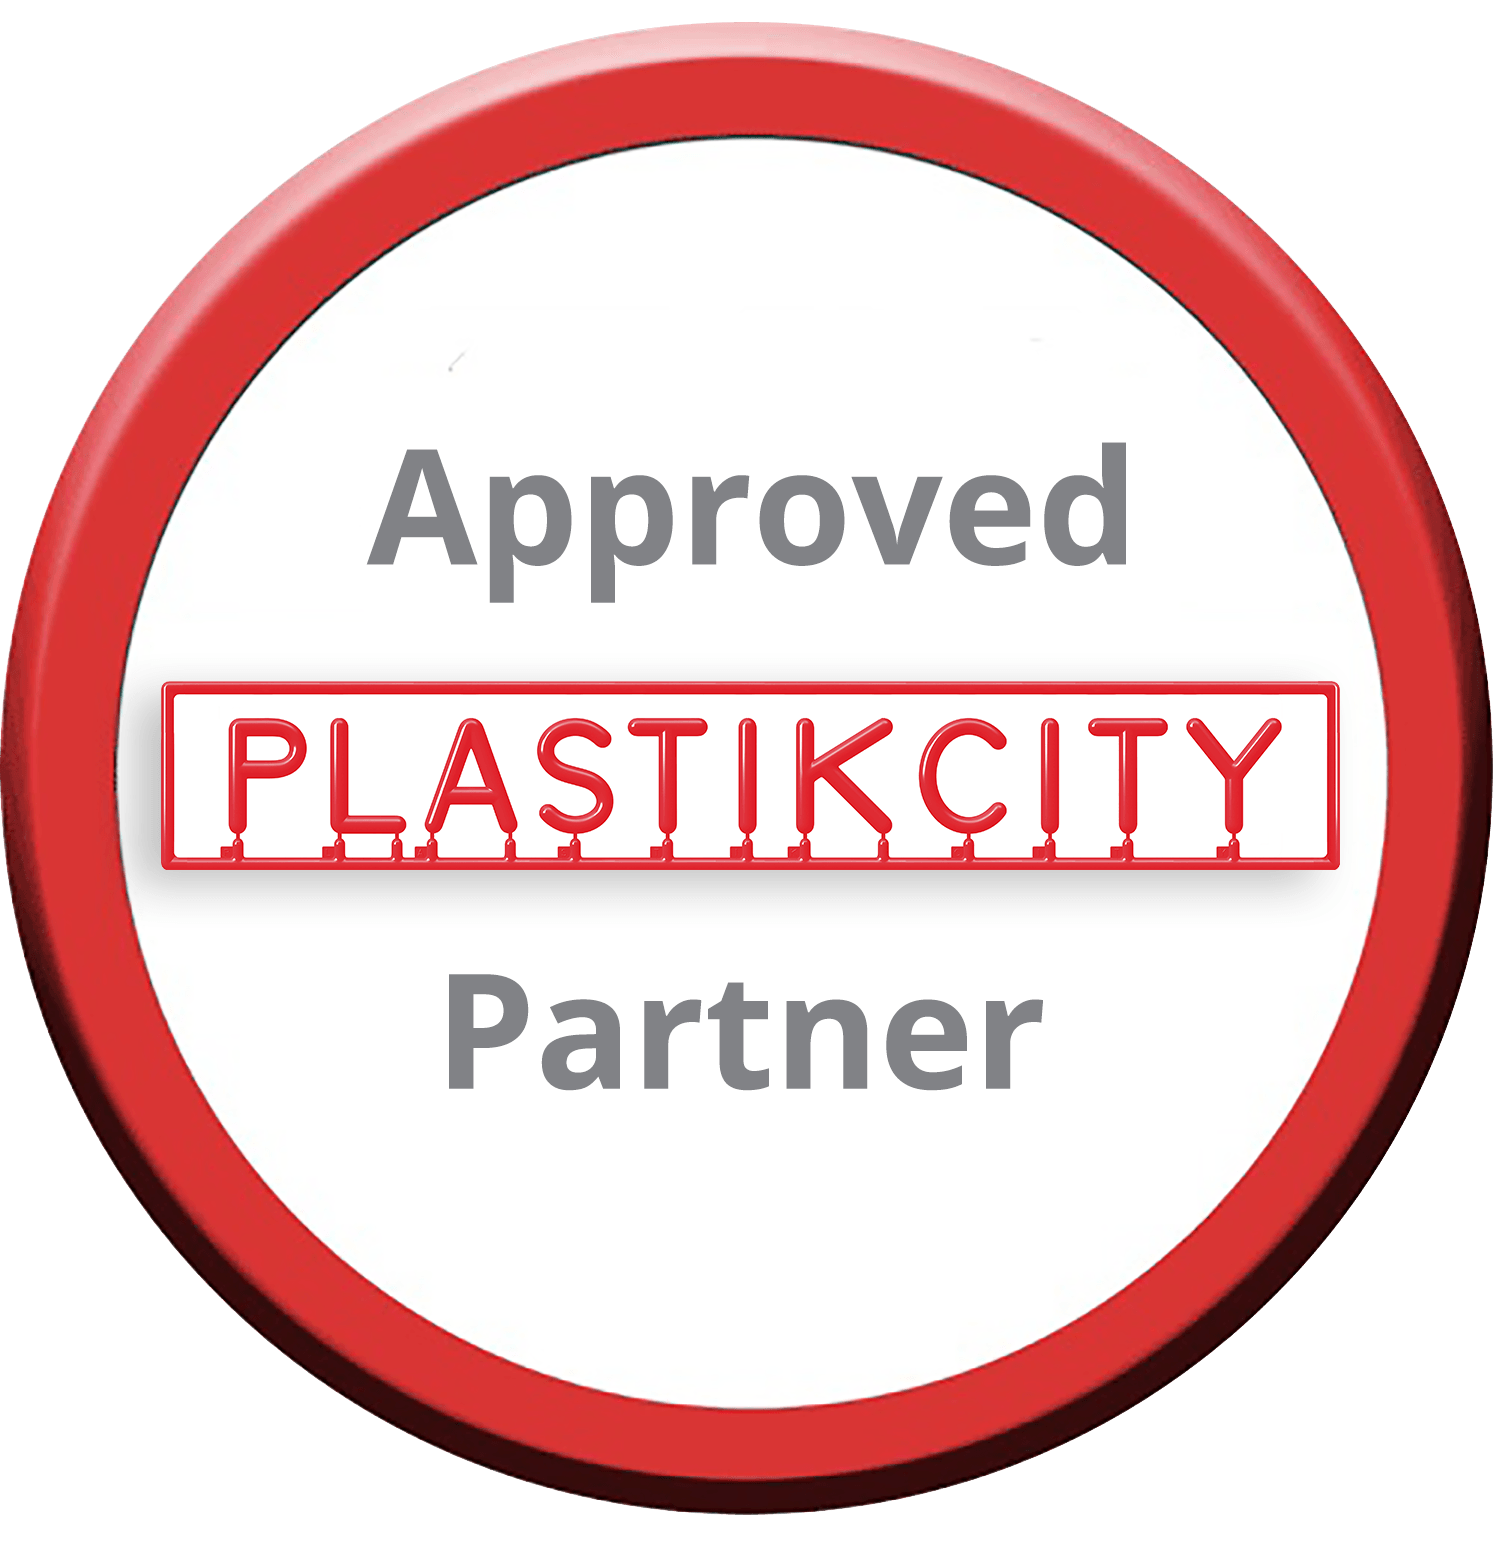 Plastic City Approved Partner